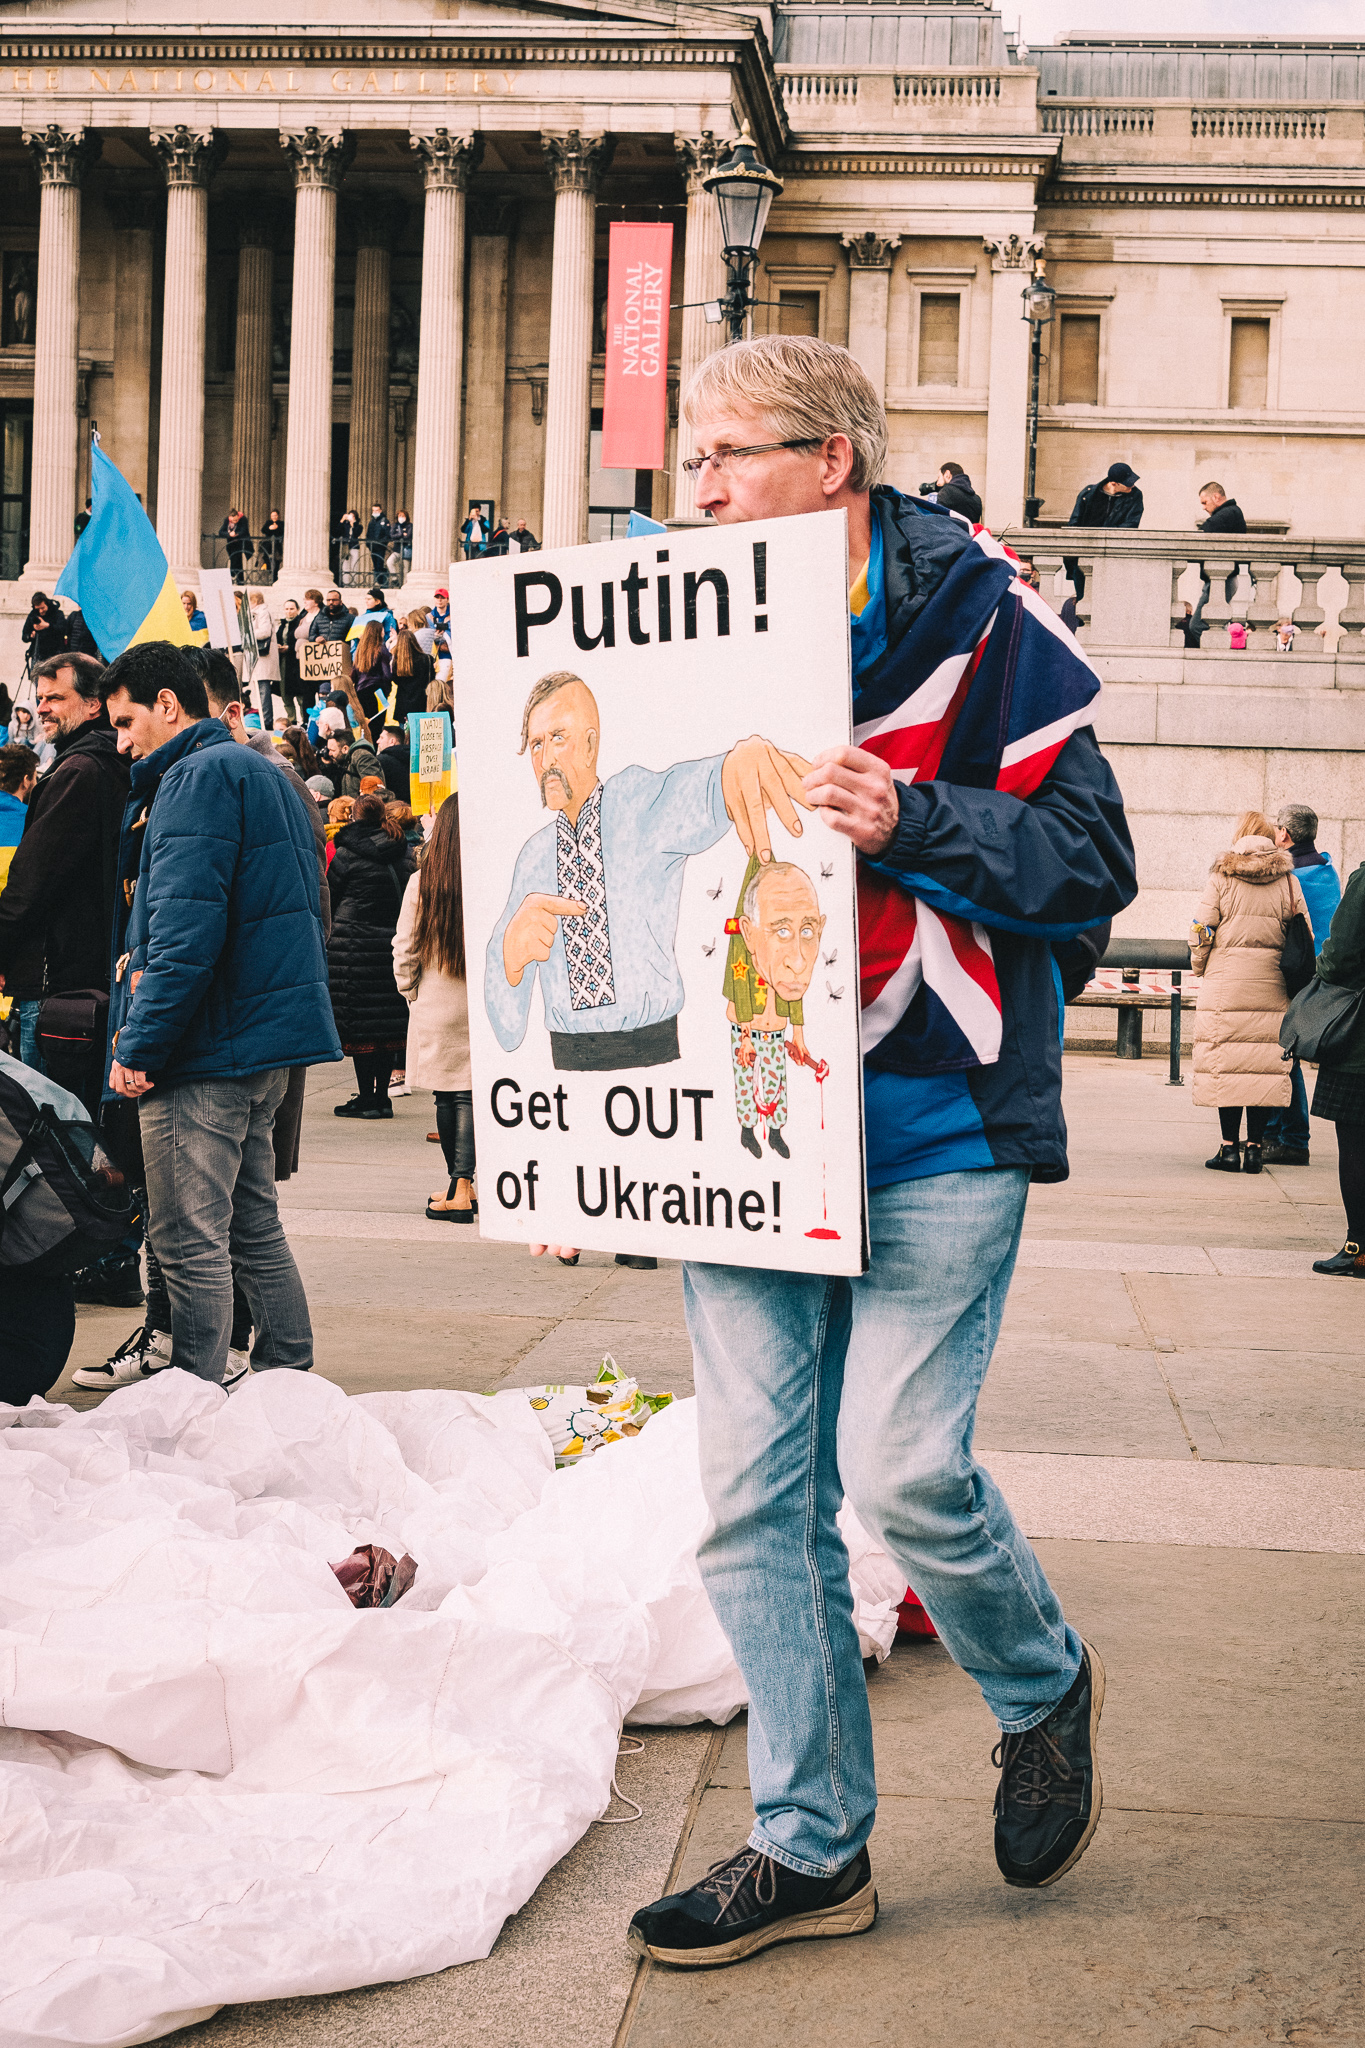 A protester holding a sign: "Putin! Get OUT of Ukraine!" depicting a Ukrainian Cossack picking up Putin holding a bloody tool